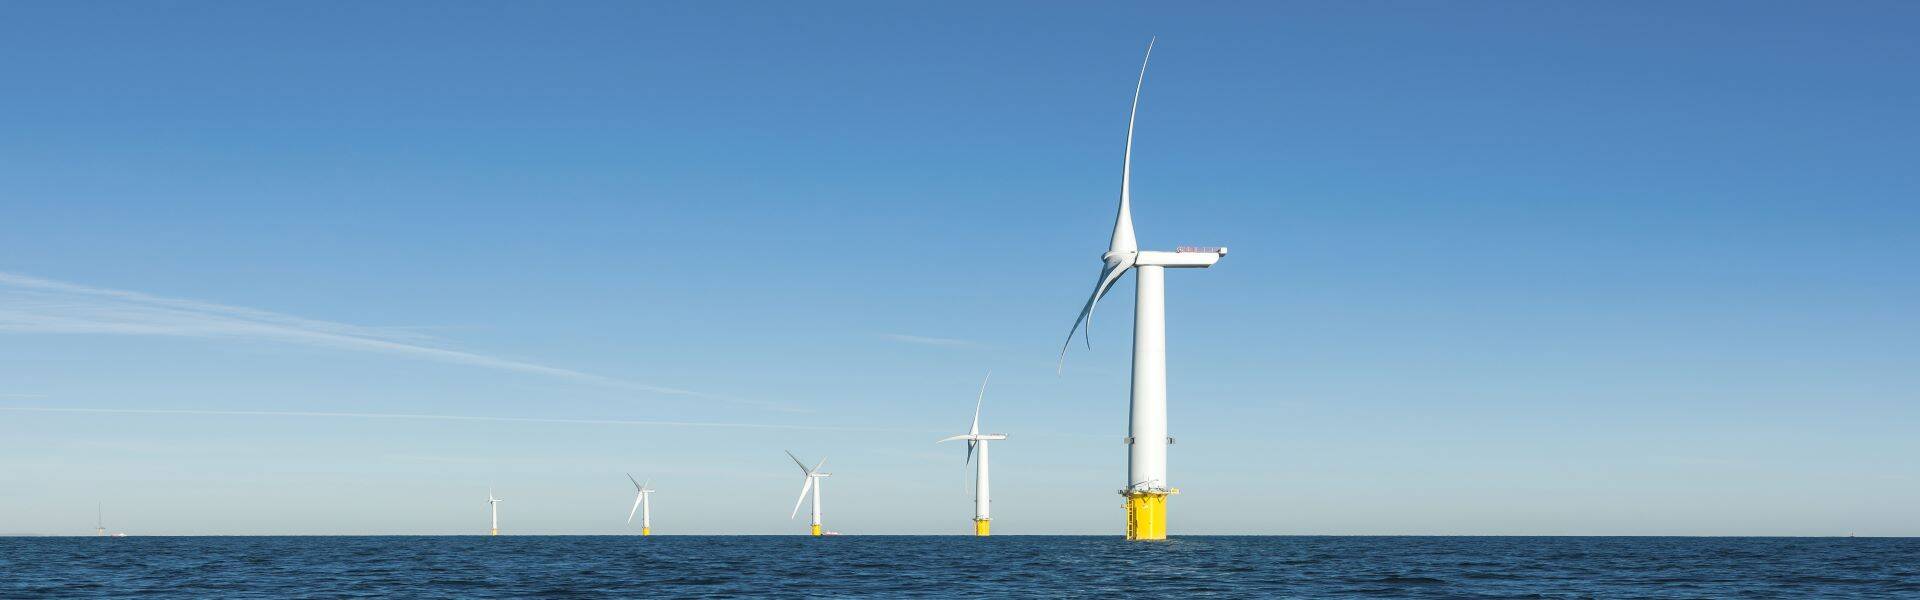 Malaysian utility buys 49% stake in Blyth offshore wind farm